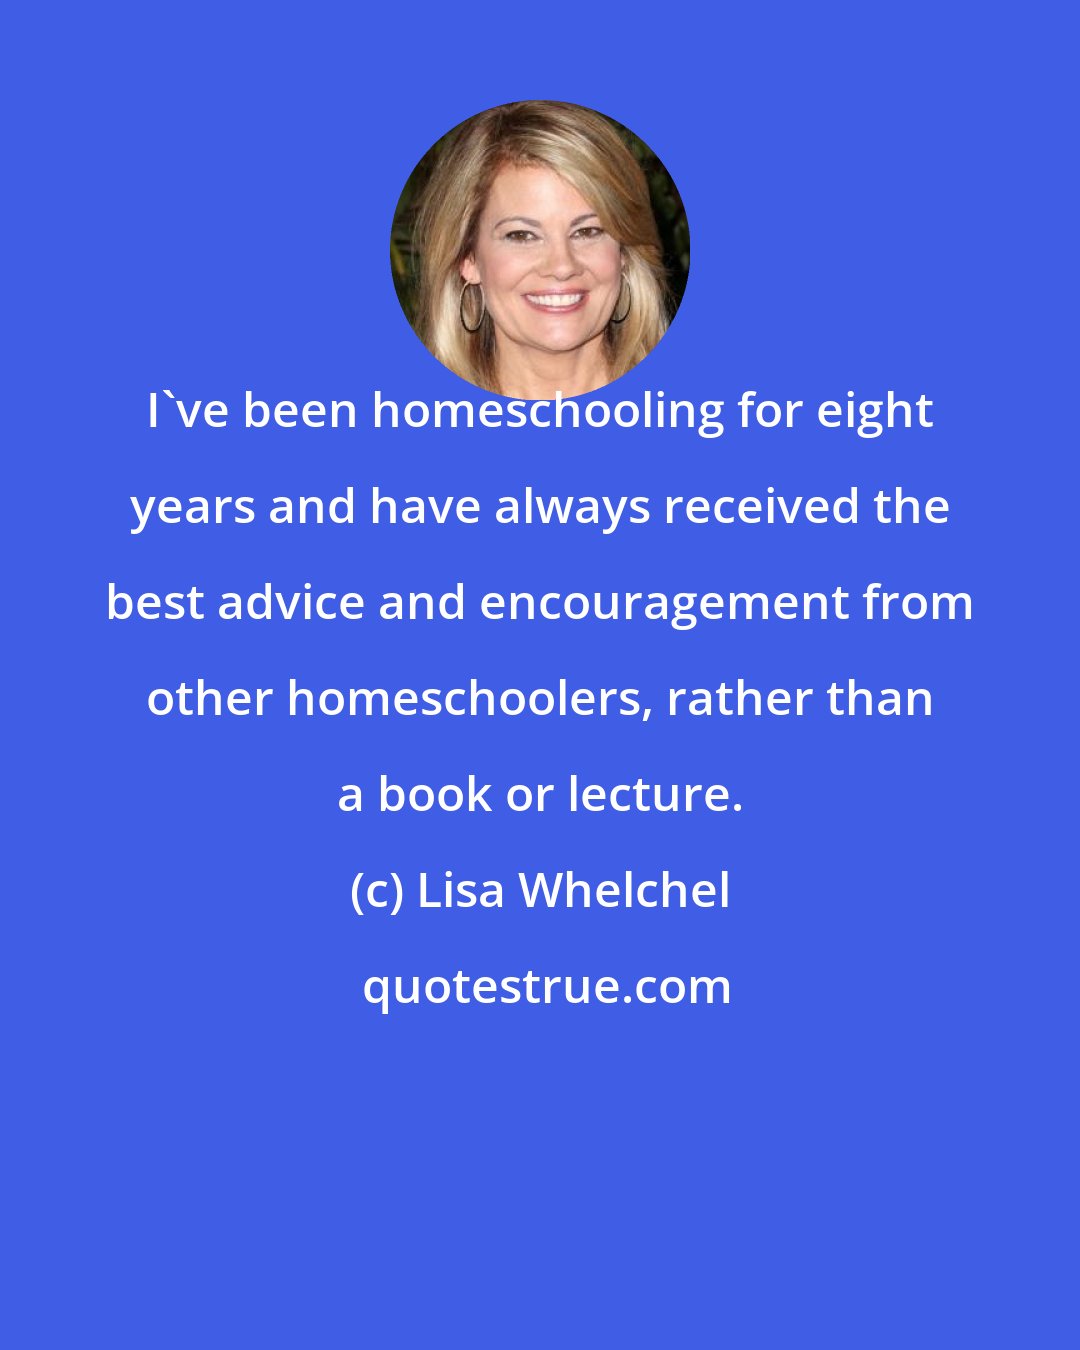 Lisa Whelchel: I've been homeschooling for eight years and have always received the best advice and encouragement from other homeschoolers, rather than a book or lecture.